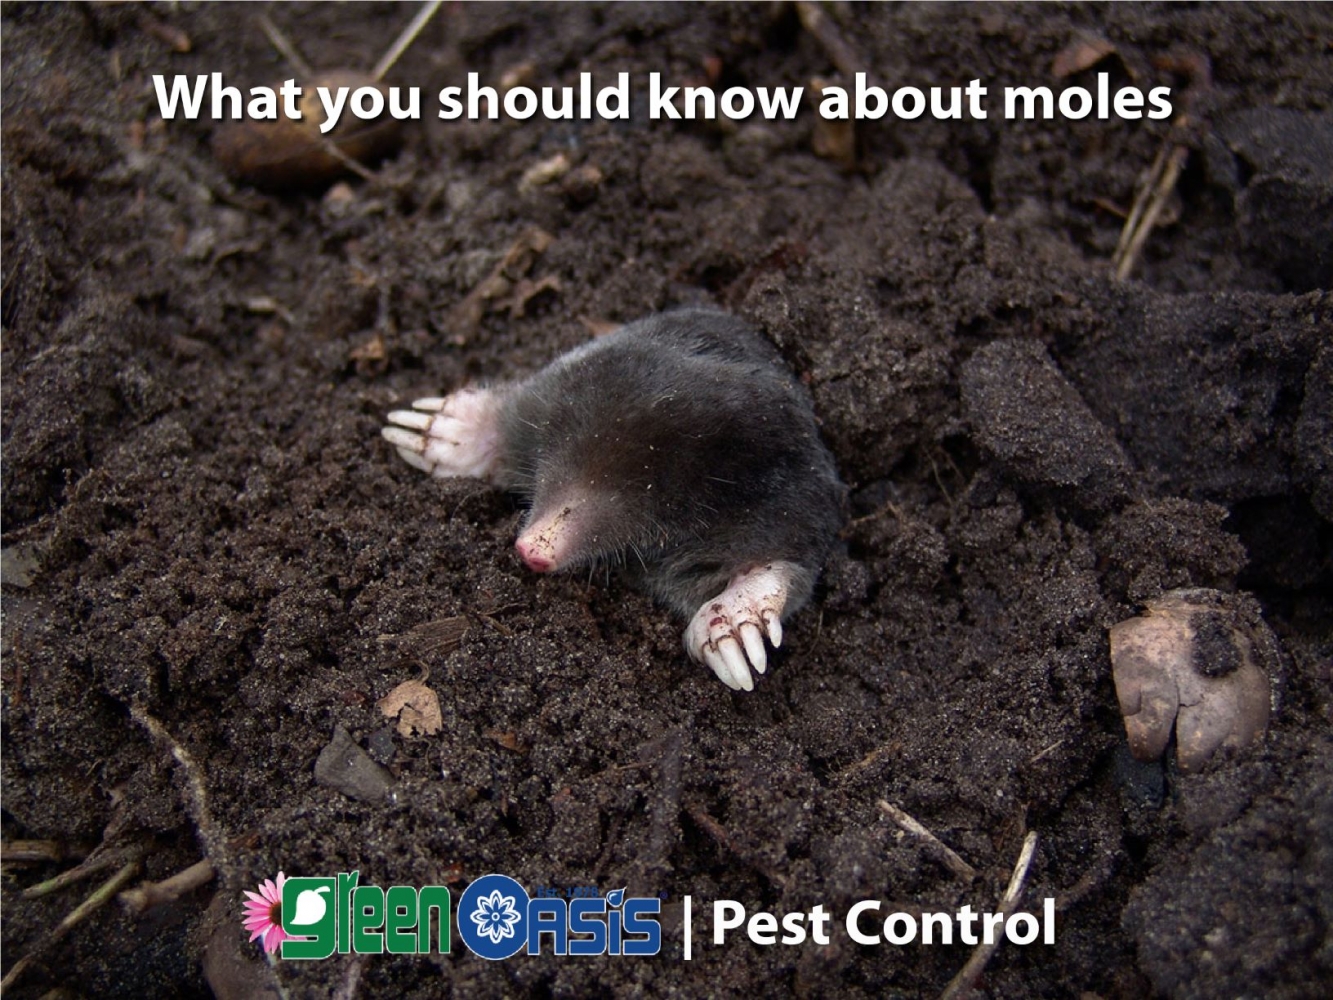 what-you-should-know-about-moles-resized.jpg?1619035434